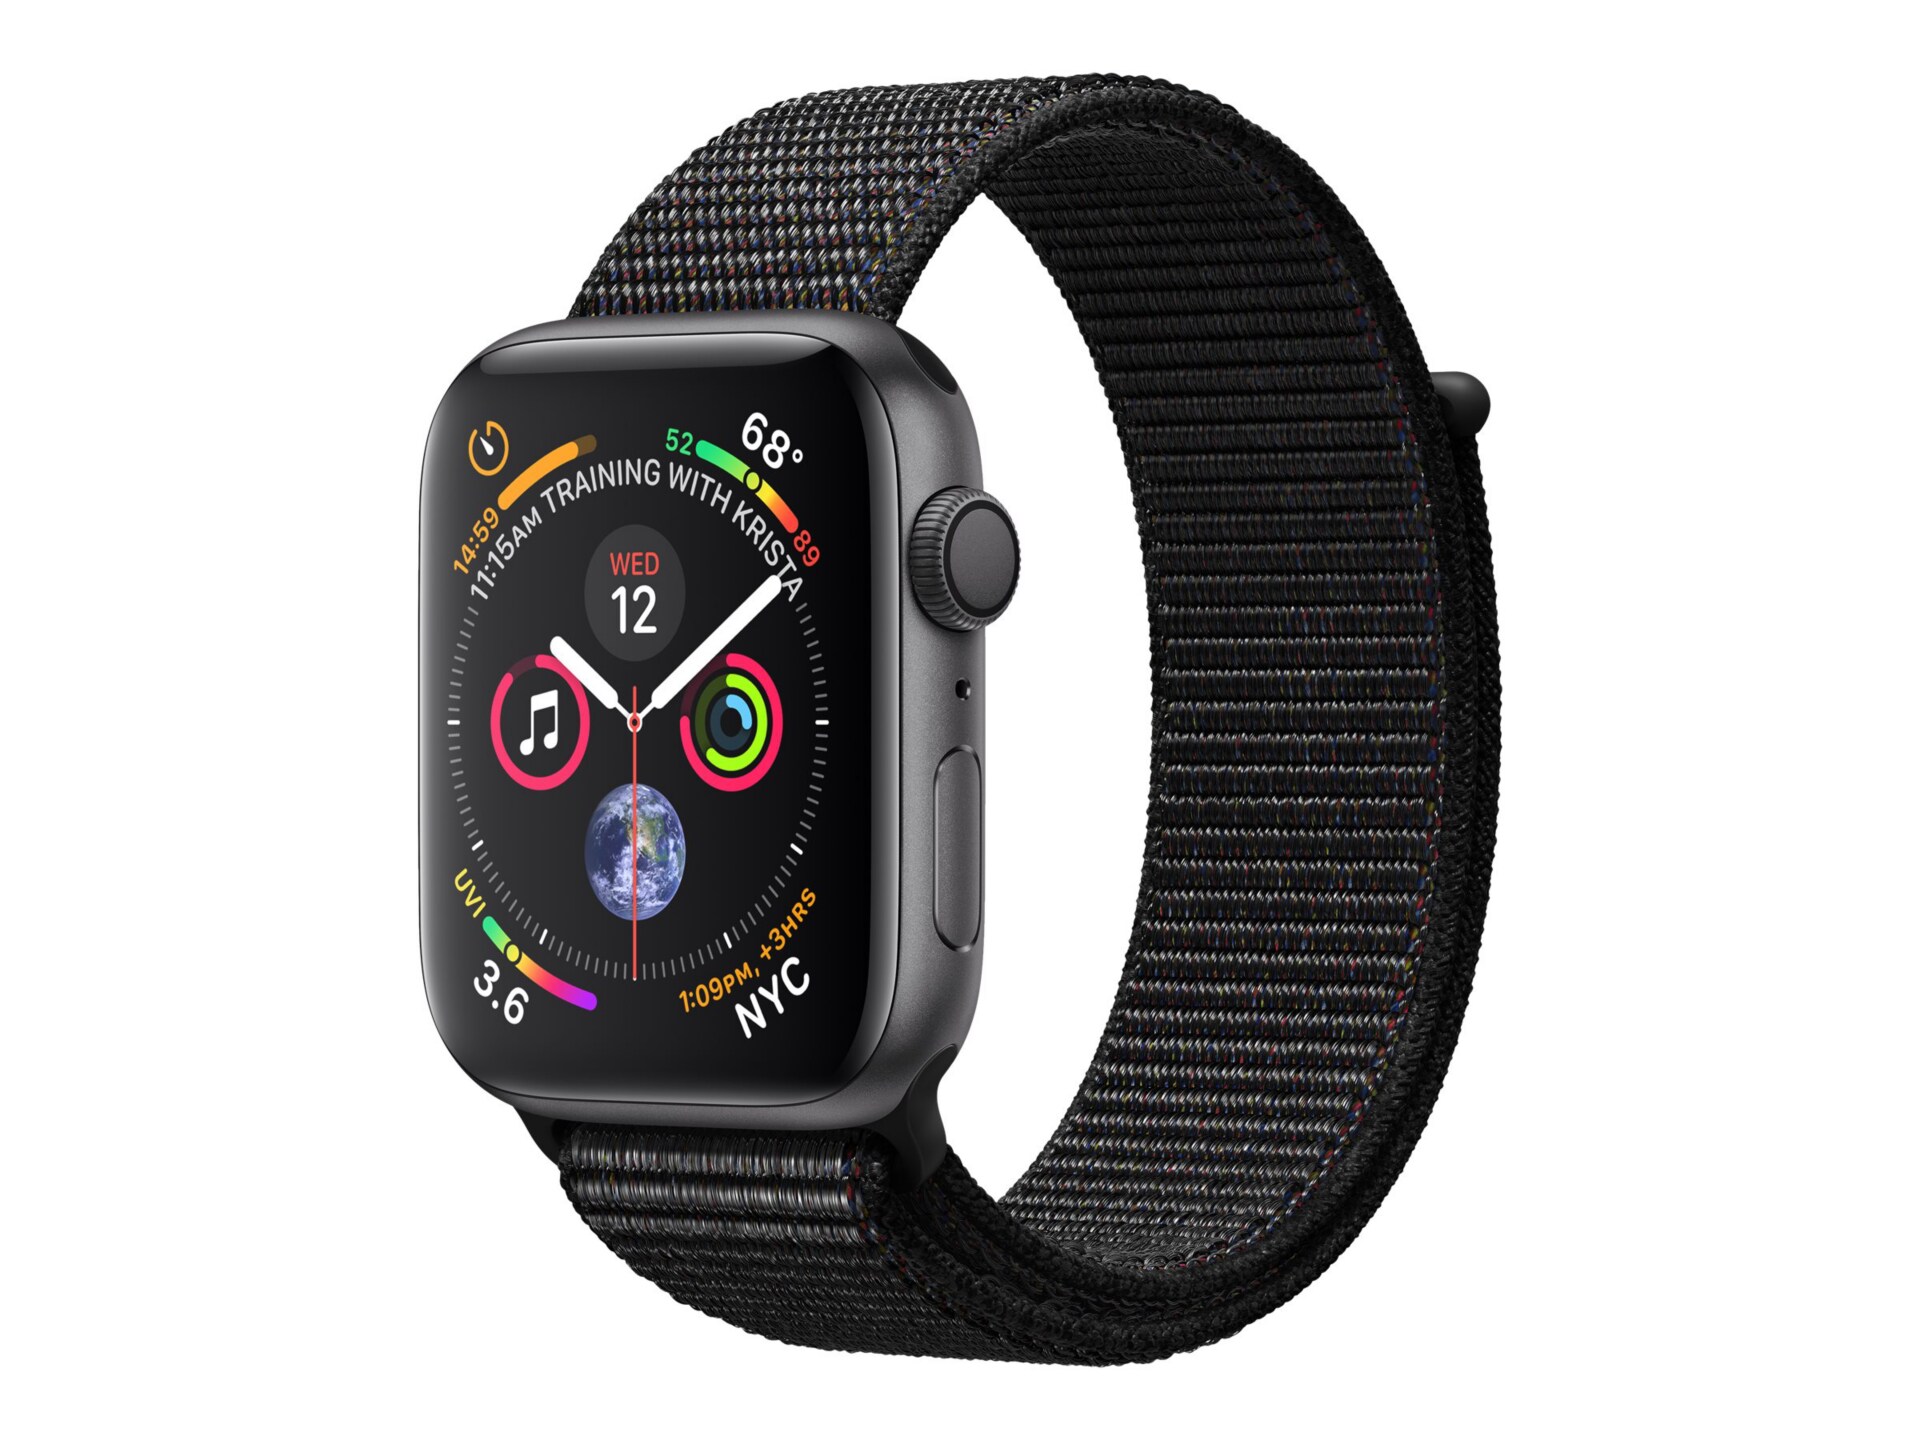 Apple Watch Series 4 (GPS) - space gray aluminum - smart watch with sport l